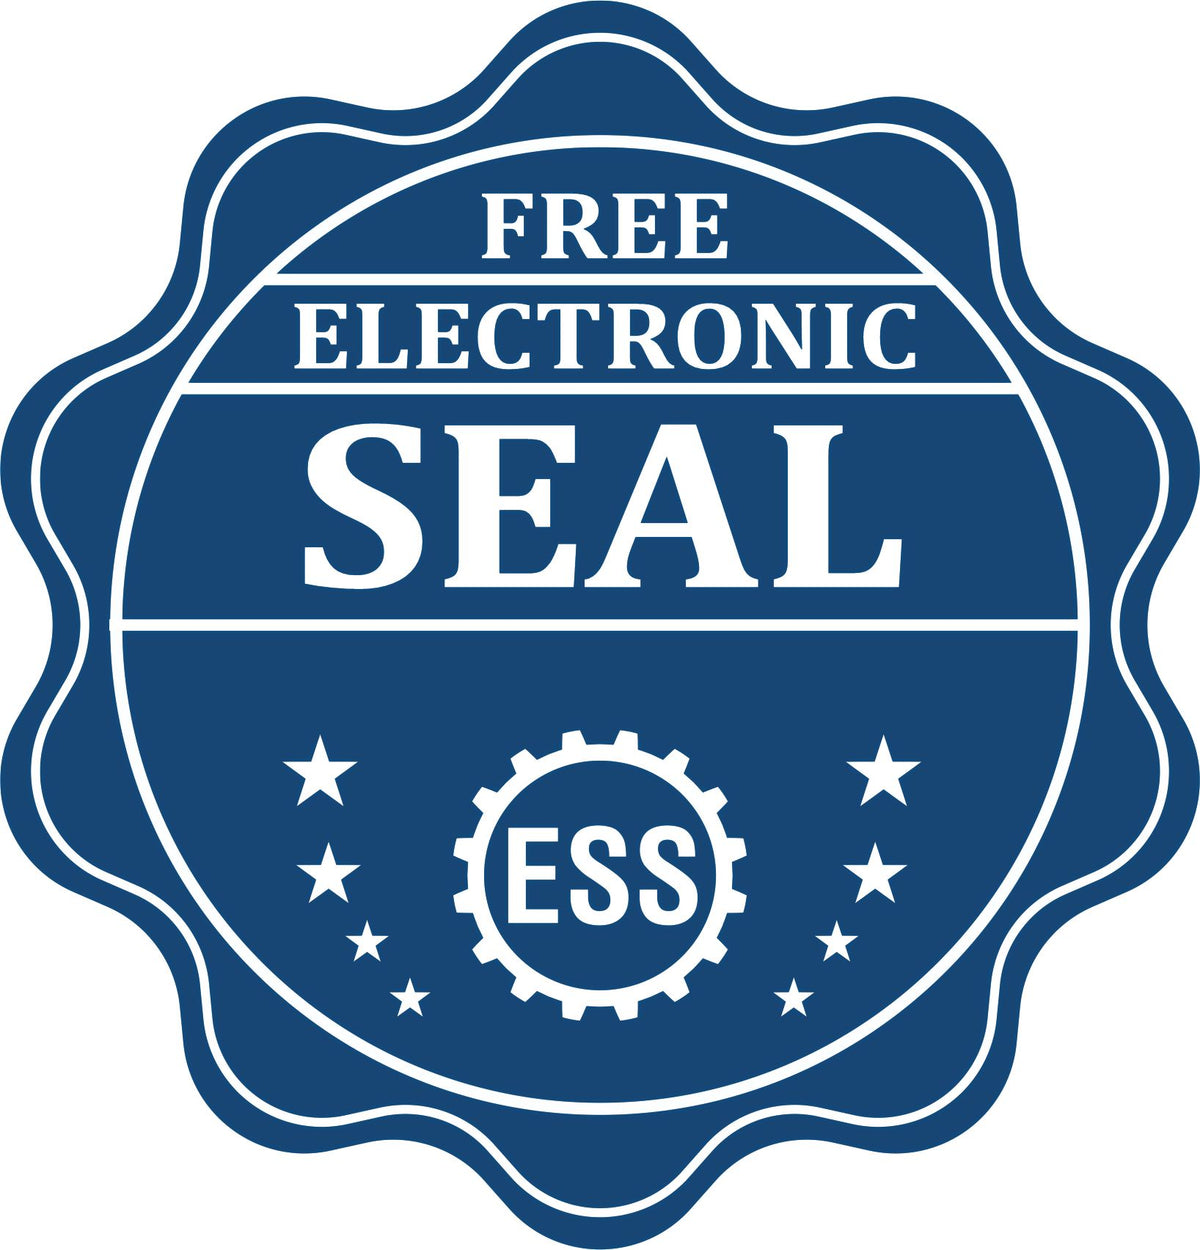 A badge showing a free electronic seal for the Slim Pre-Inked Vermont Land Surveyor Seal Stamp with stars and the ESS gear on the emblem.